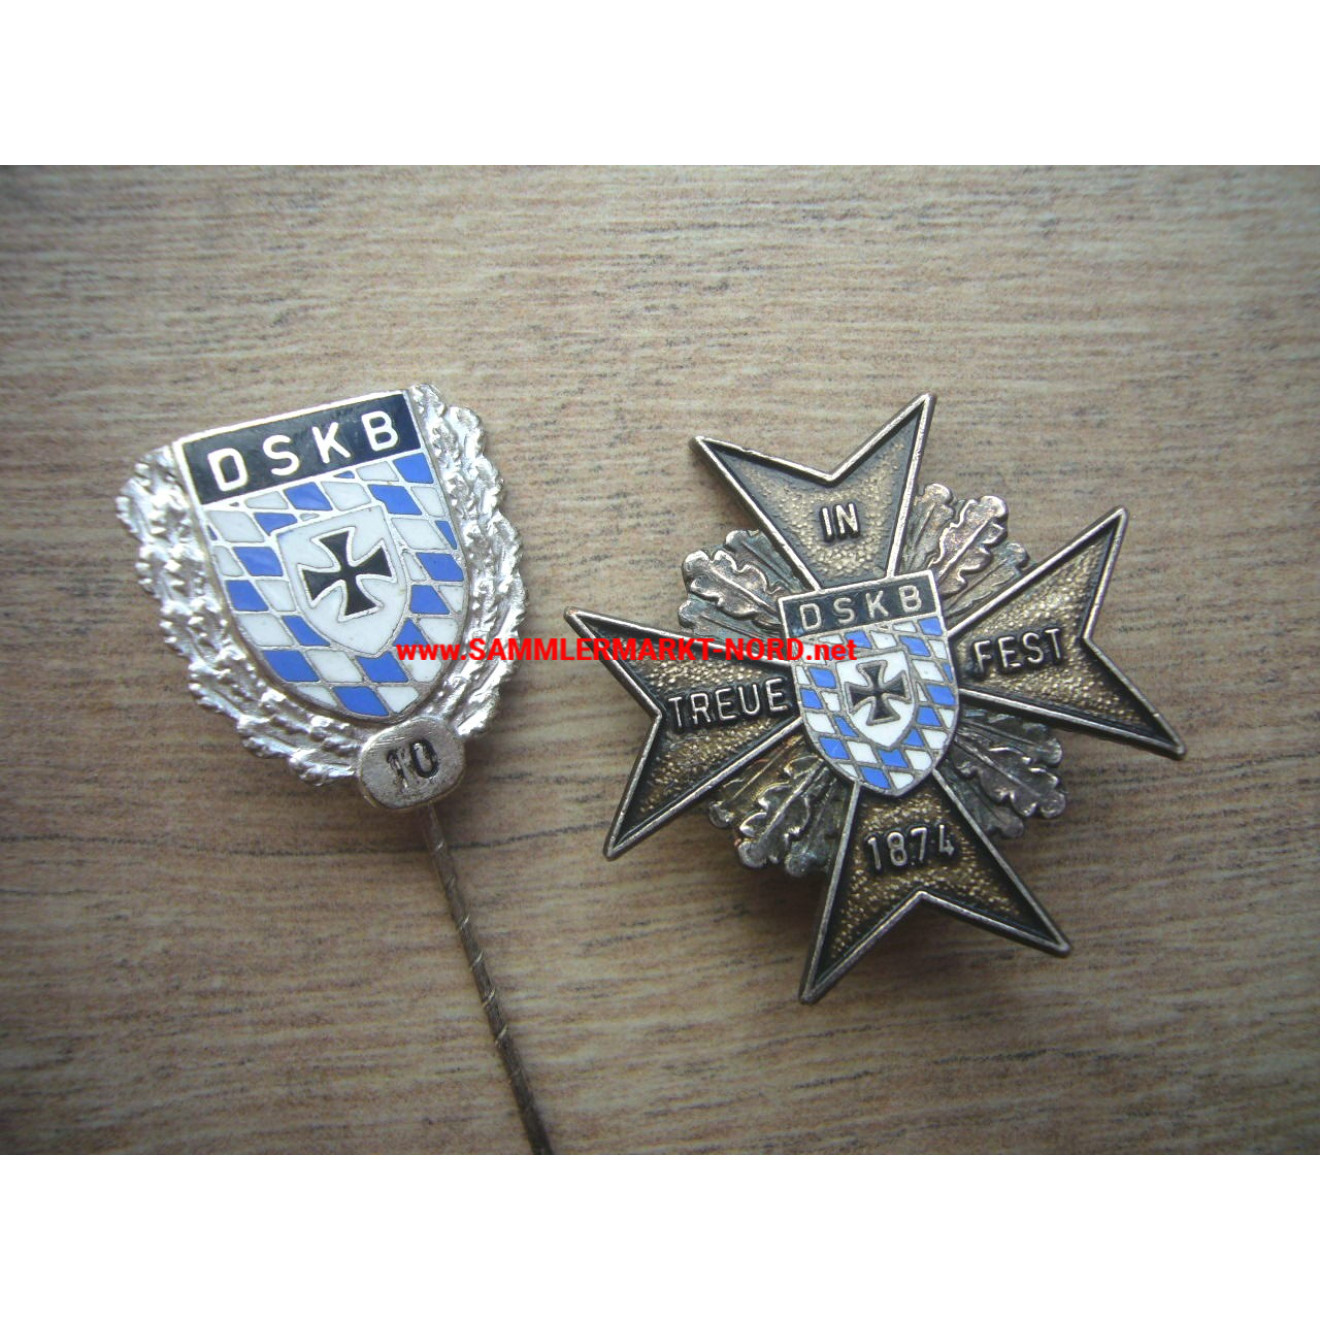 German Soldiers and Comradeship Association (DSKB) Bavaria - Cross of Honor for Loyalty & Silver Badge of Honour